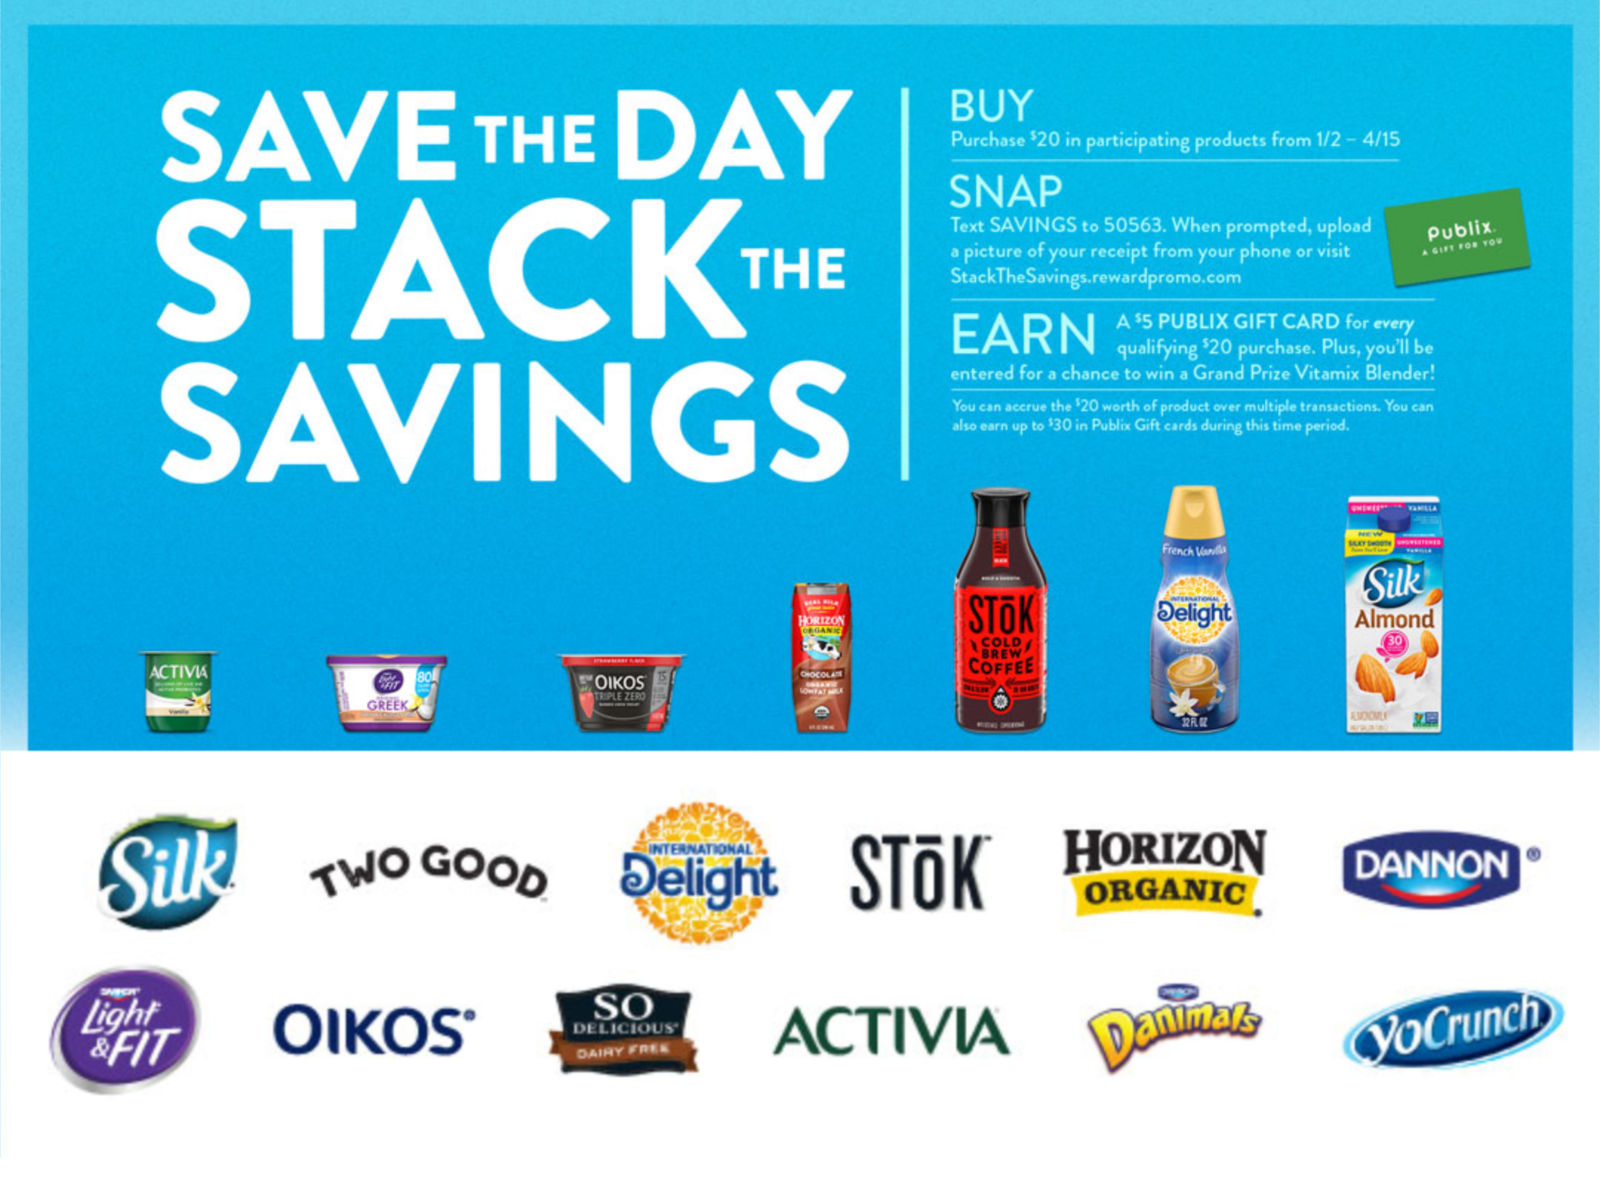 One More Week To Earn Your Publix Gift Card(s) As Part Of The Save The Day Stack The Savings Rebate!